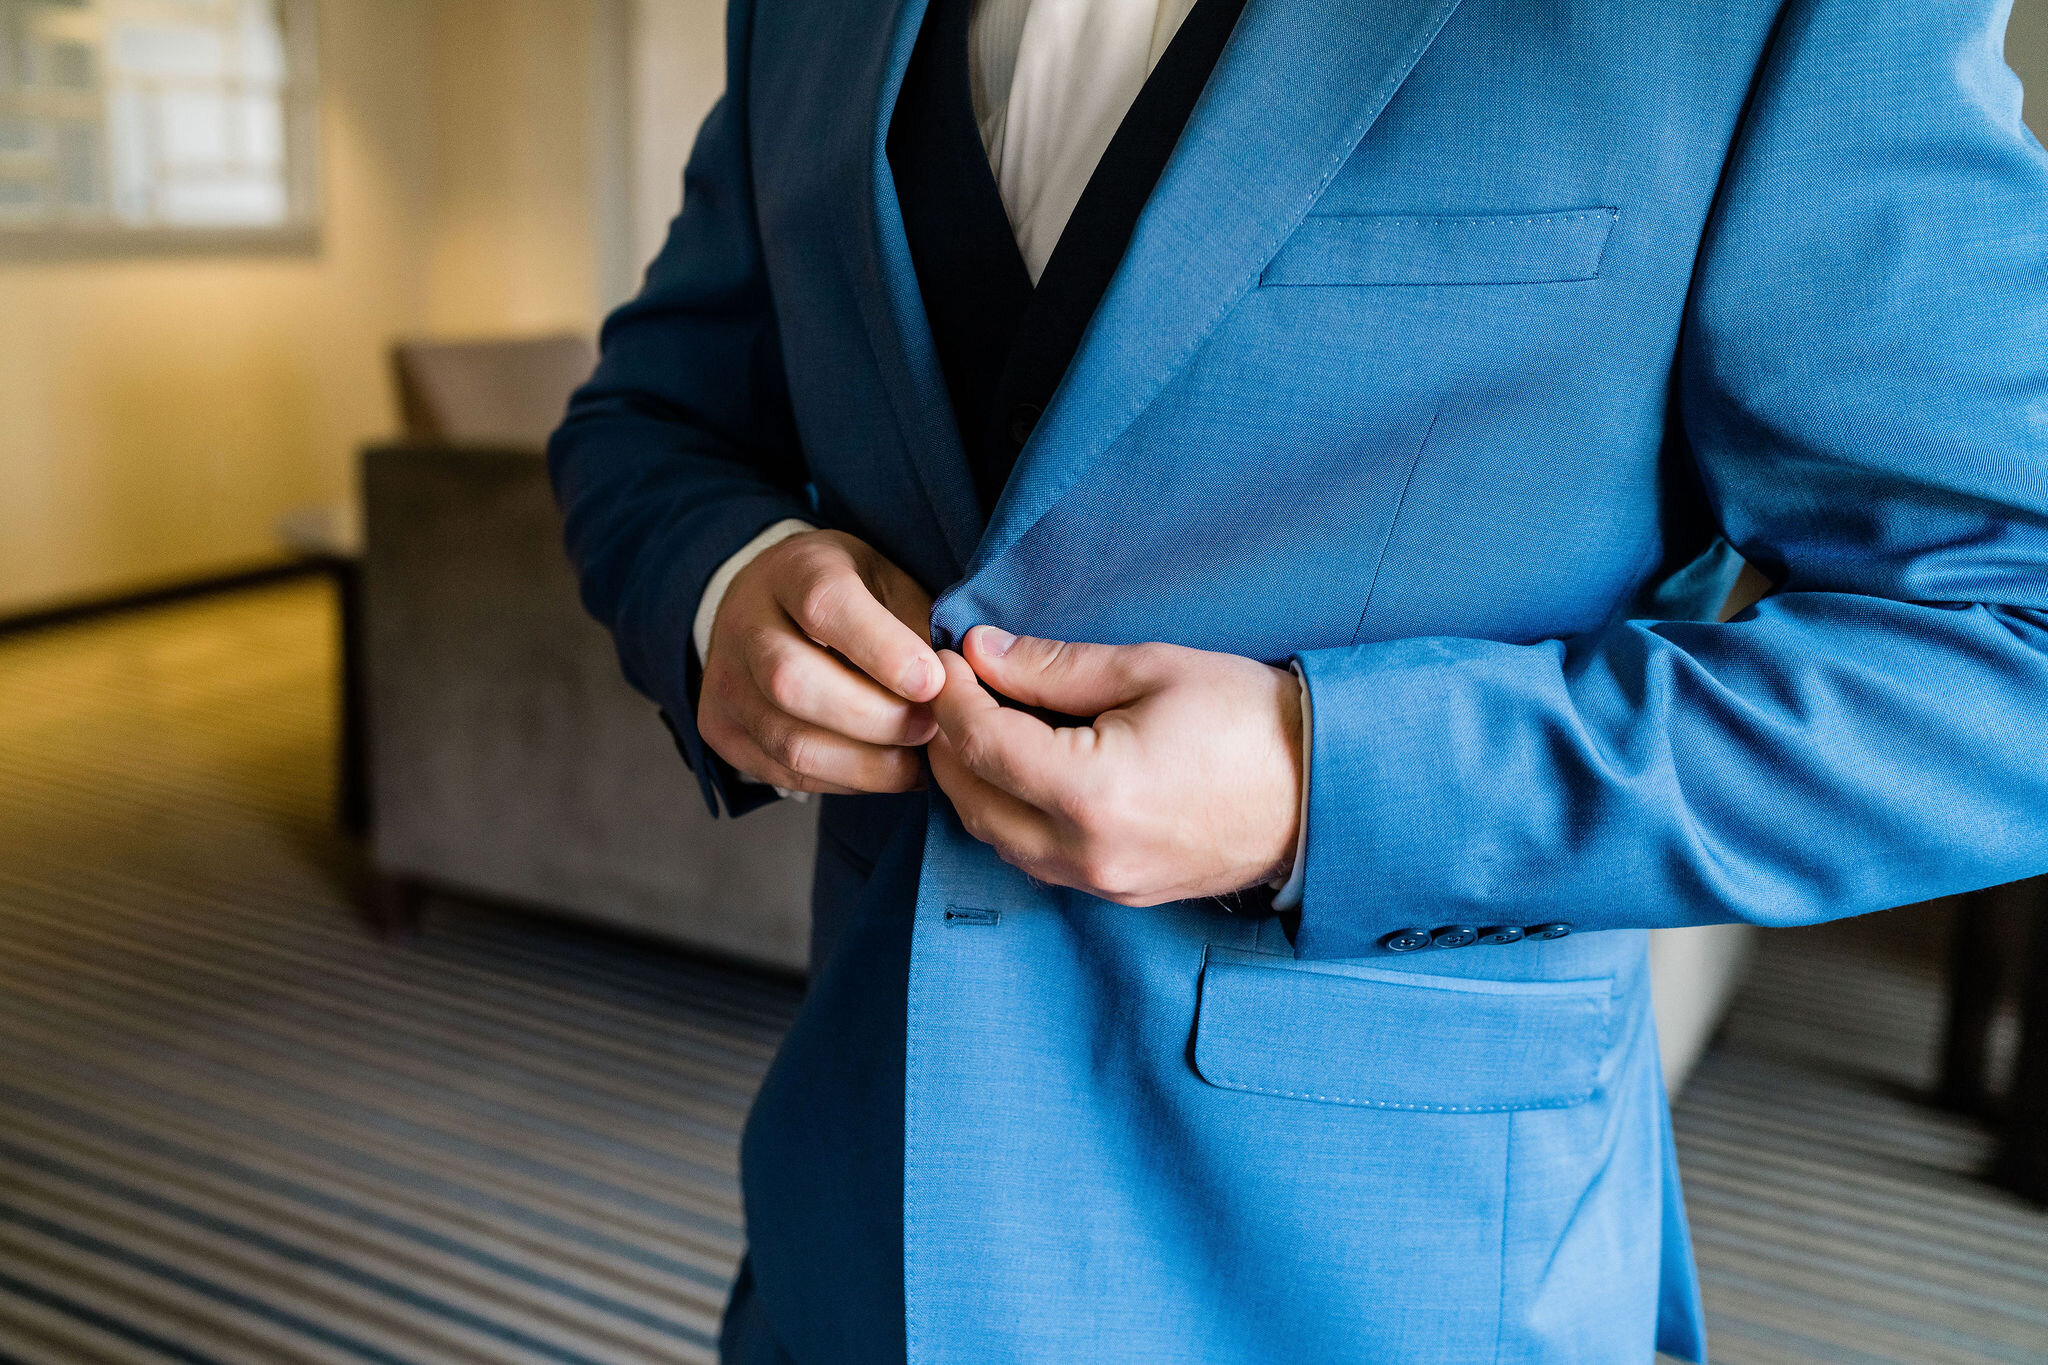 Groom buttoning up his suit jacket